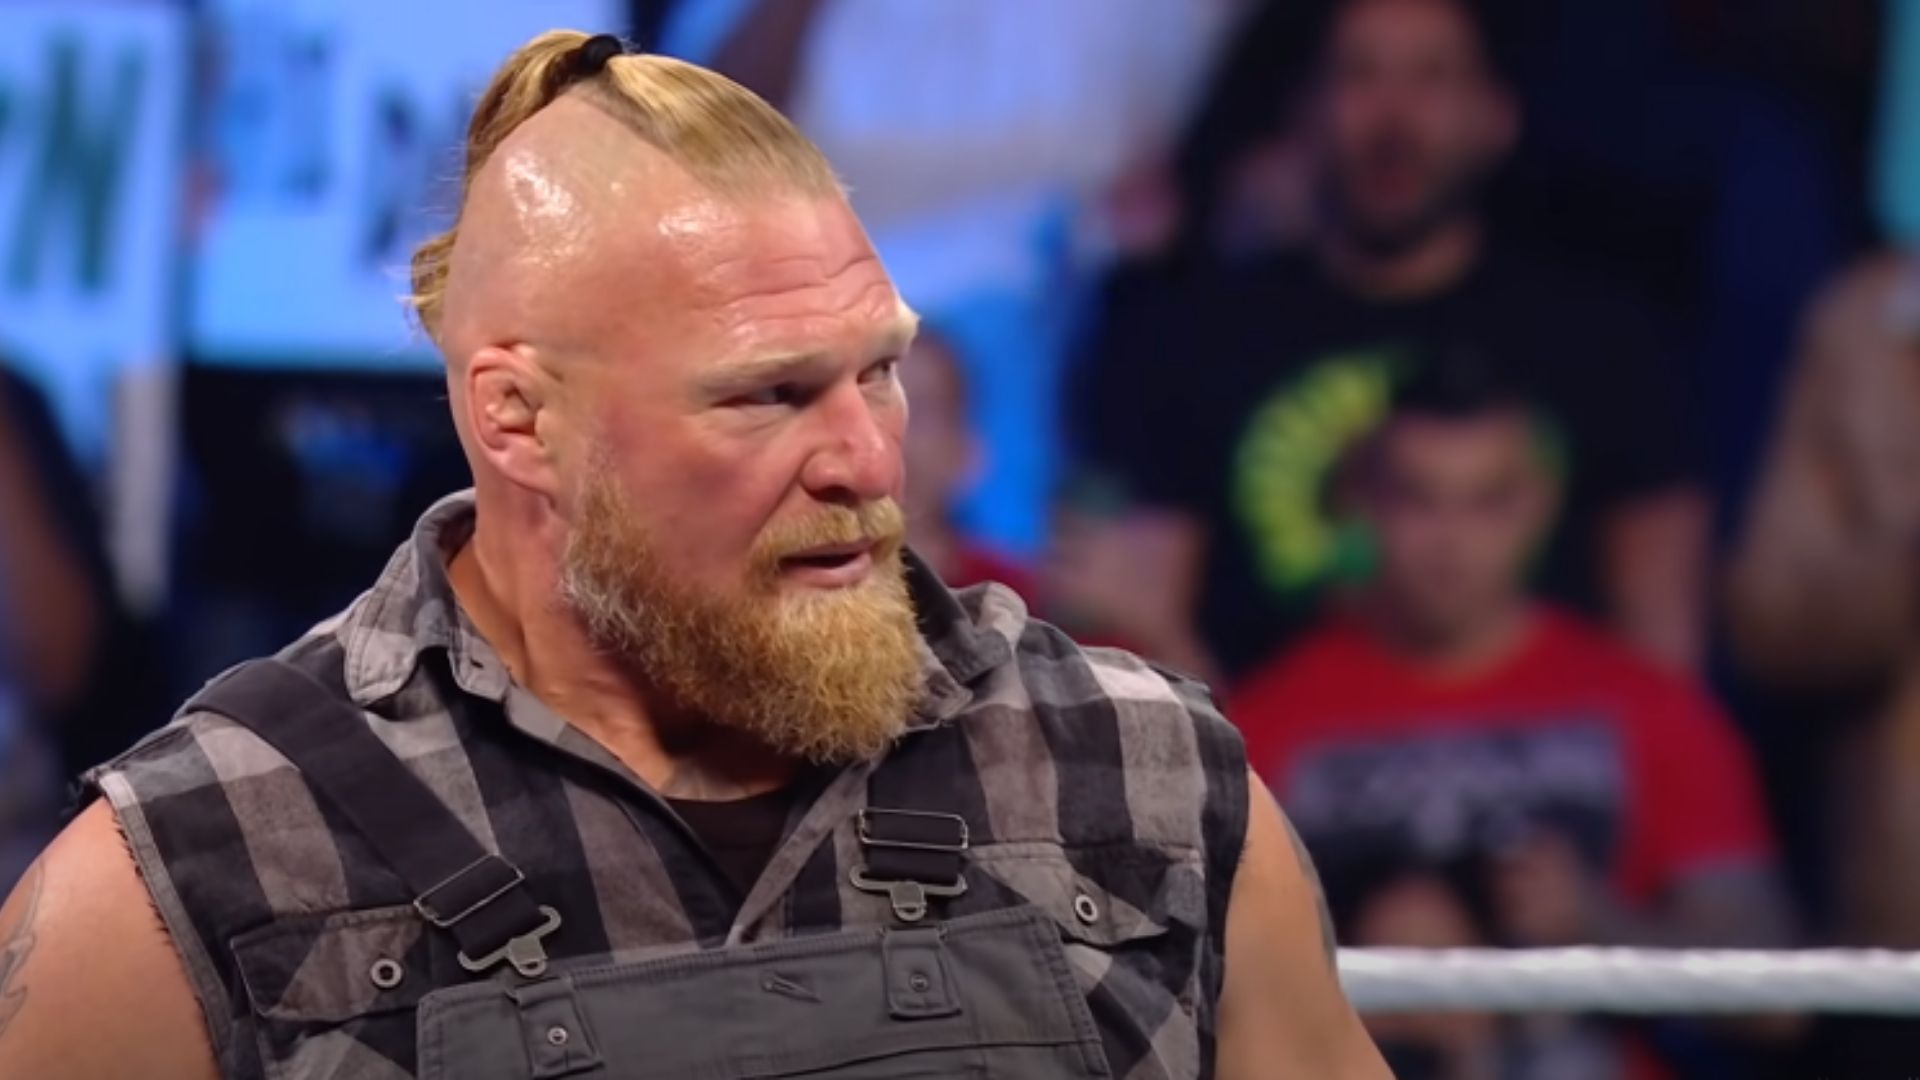 Brock Lesnar returned to WWE in 2021 with a new look